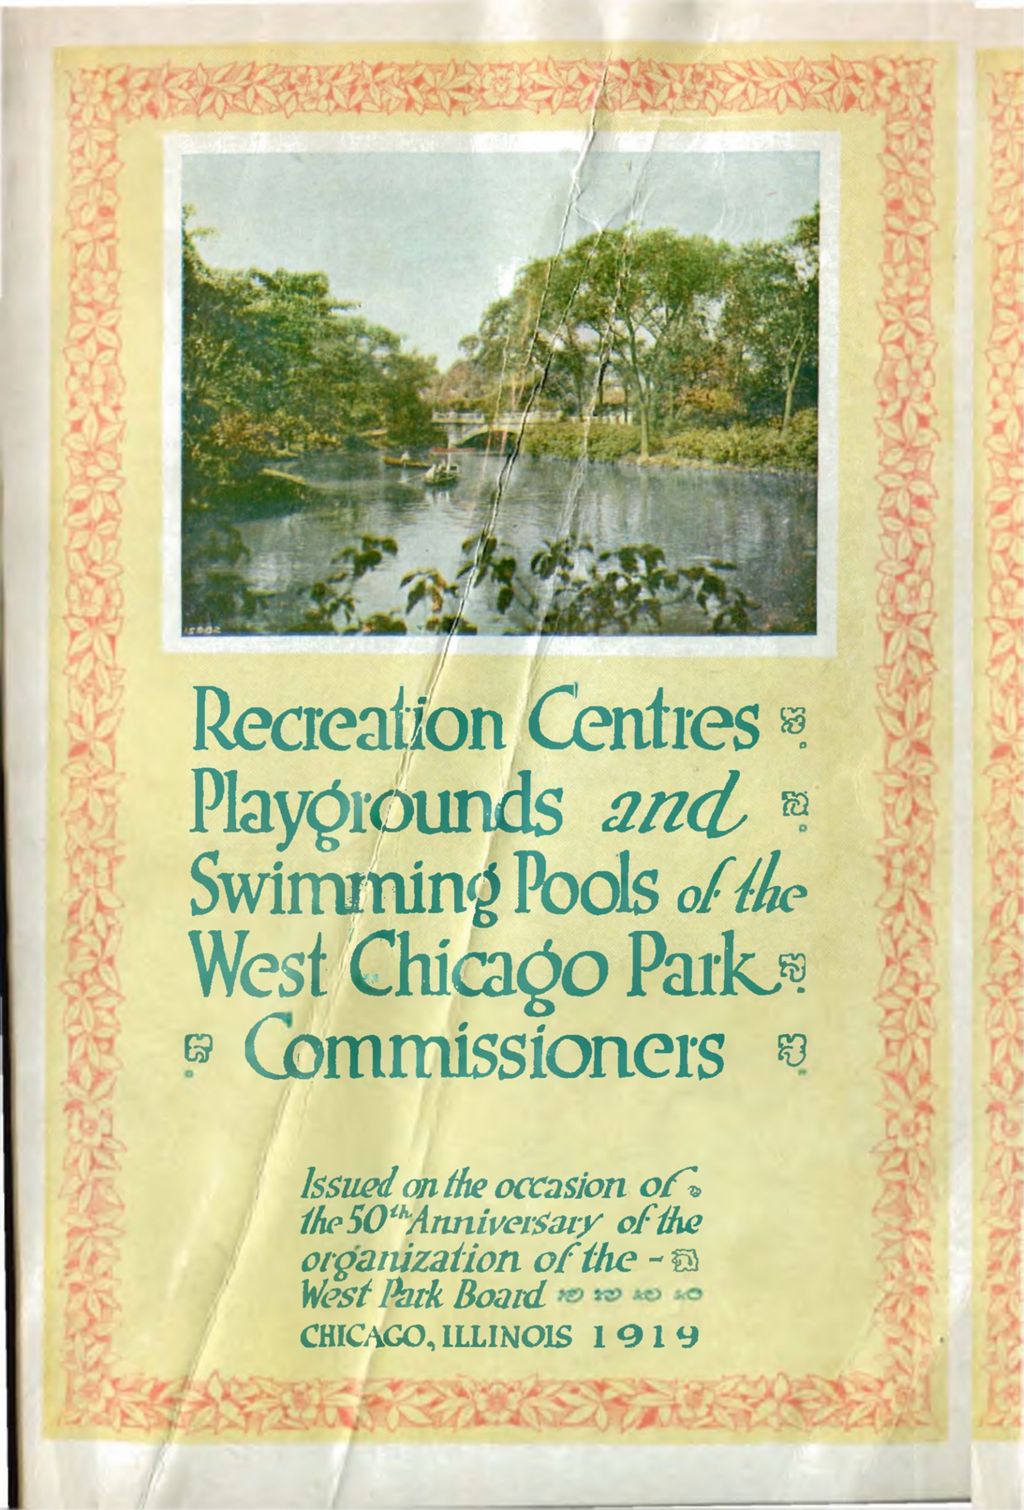 Pamphlet of West Chicago Parks Commissioners on Recreation Centers, 1919